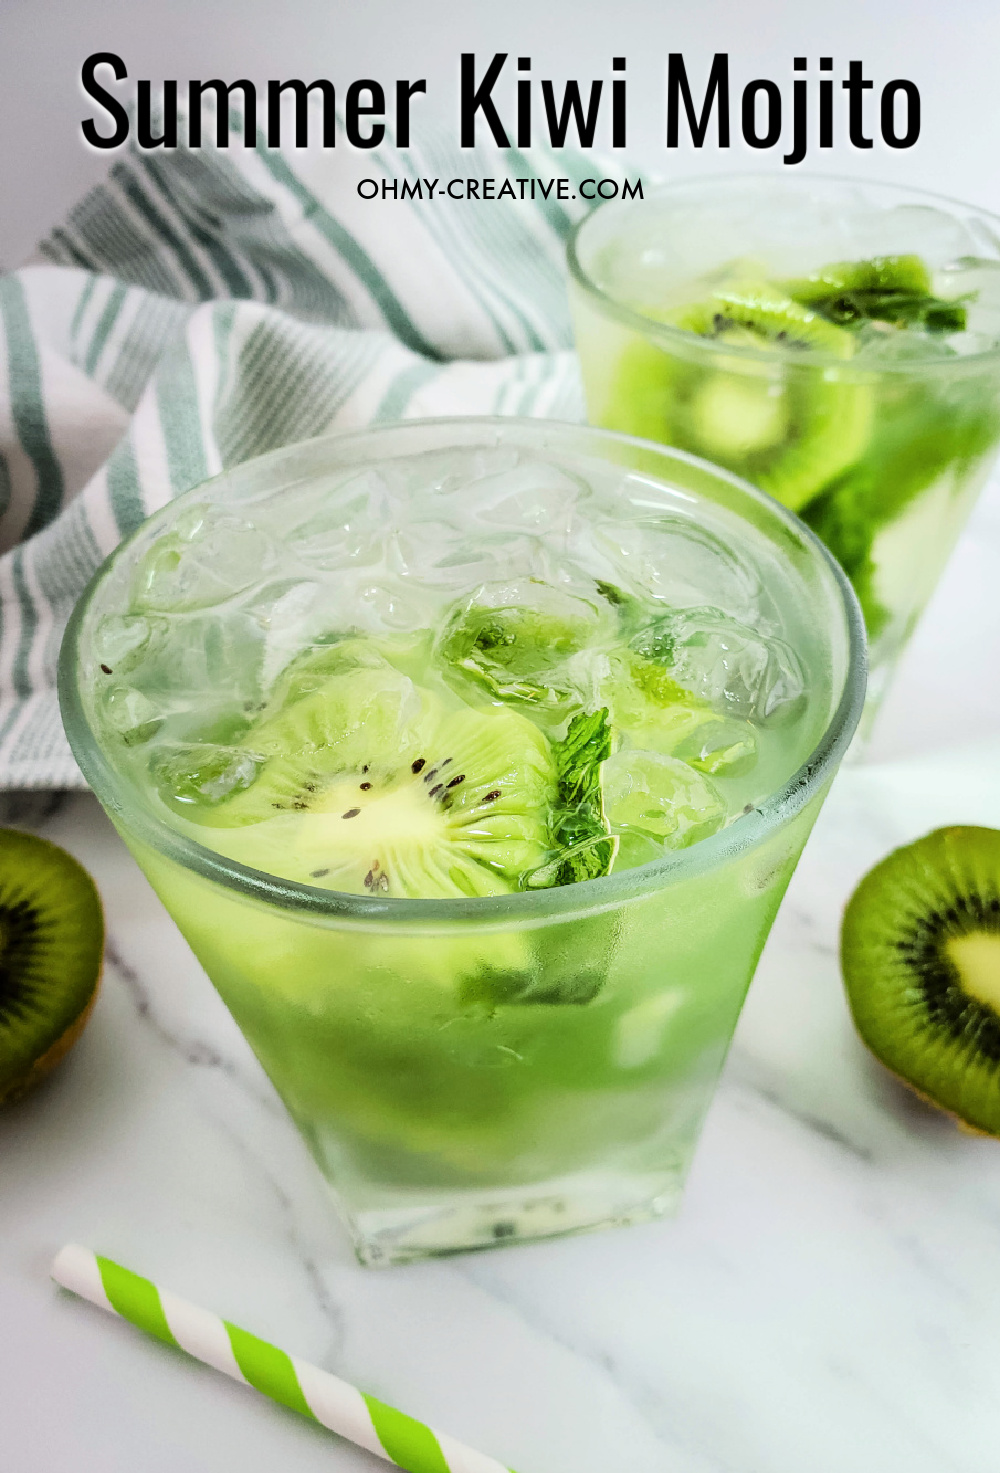 Kiwi mojito drink in a short cocktail glass with sliced kiwi, green and white cloth hand towel and a white marble background.